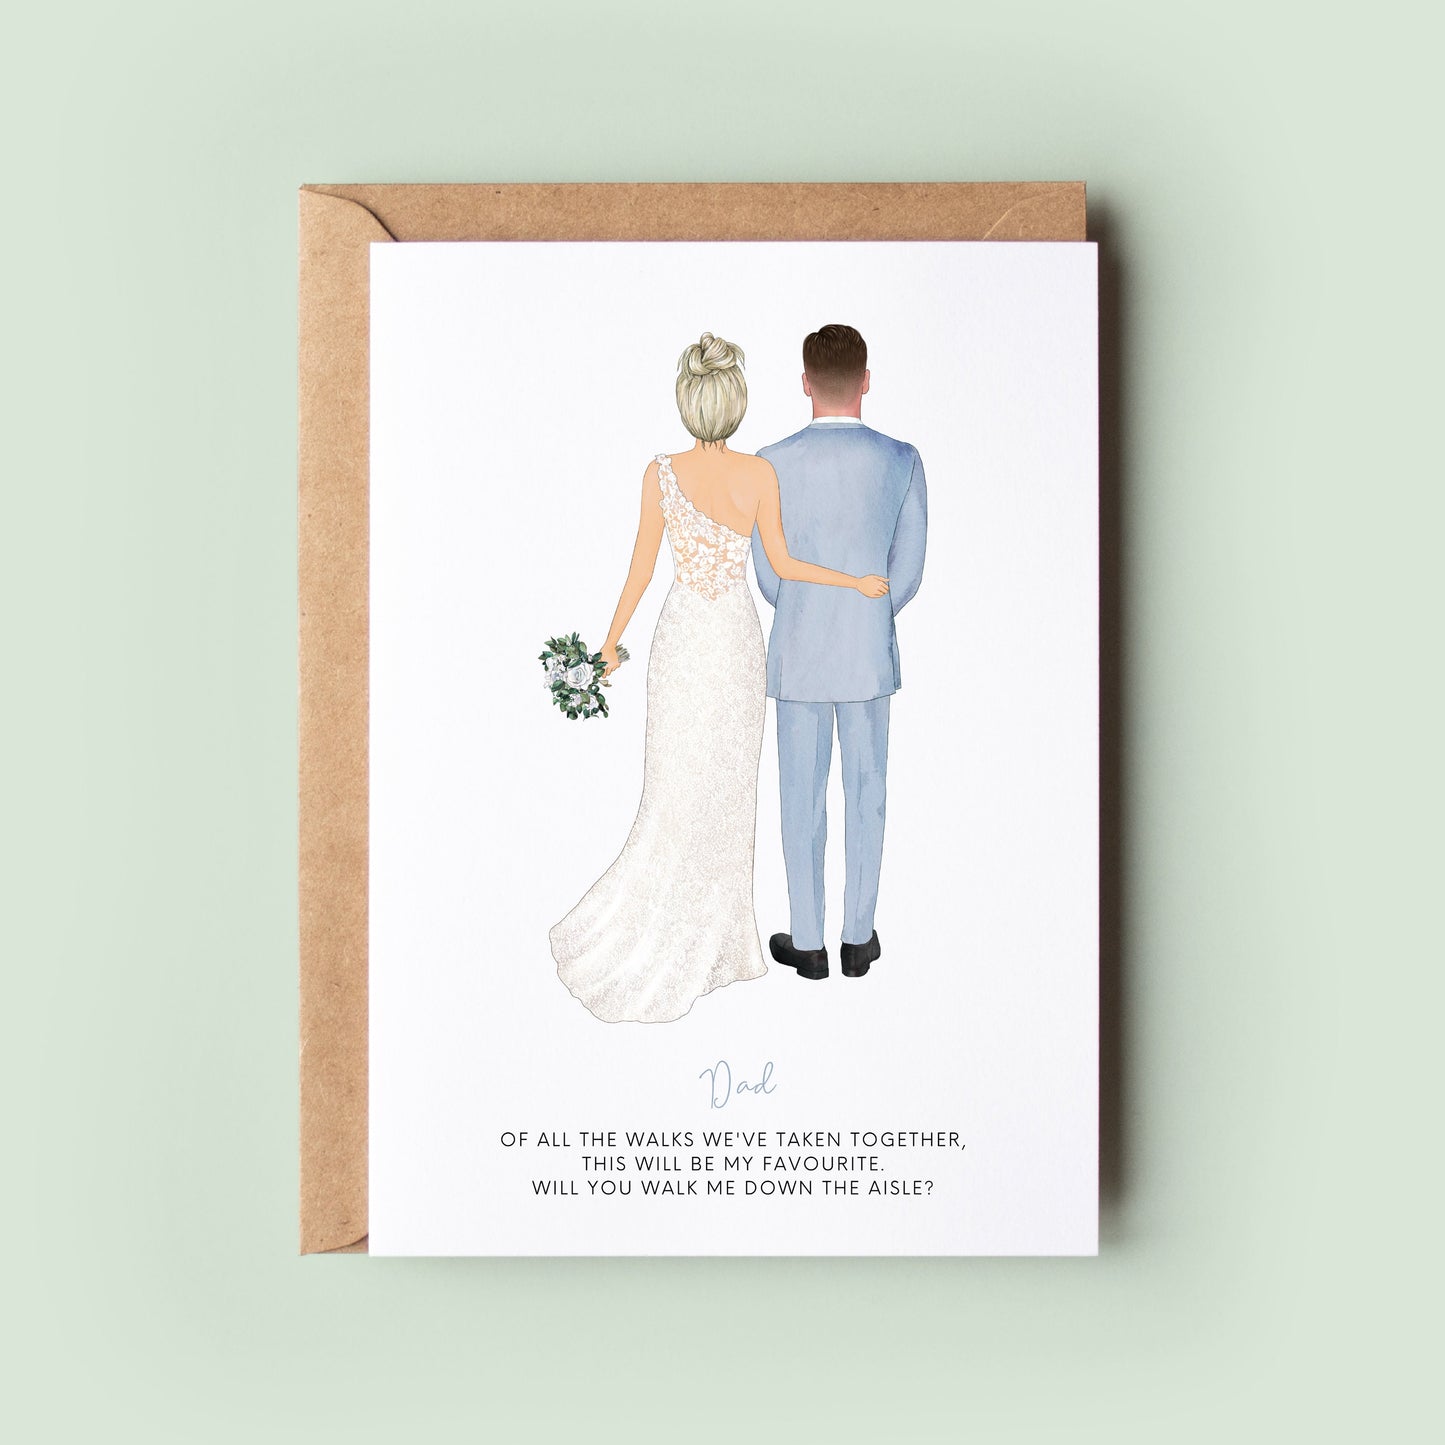 Customised Ink and Fred Wedding Card with personalised bride&#39;s dress, male&#39;s suit, and text, asking &quot;Will you walk me down the aisle?&quot;